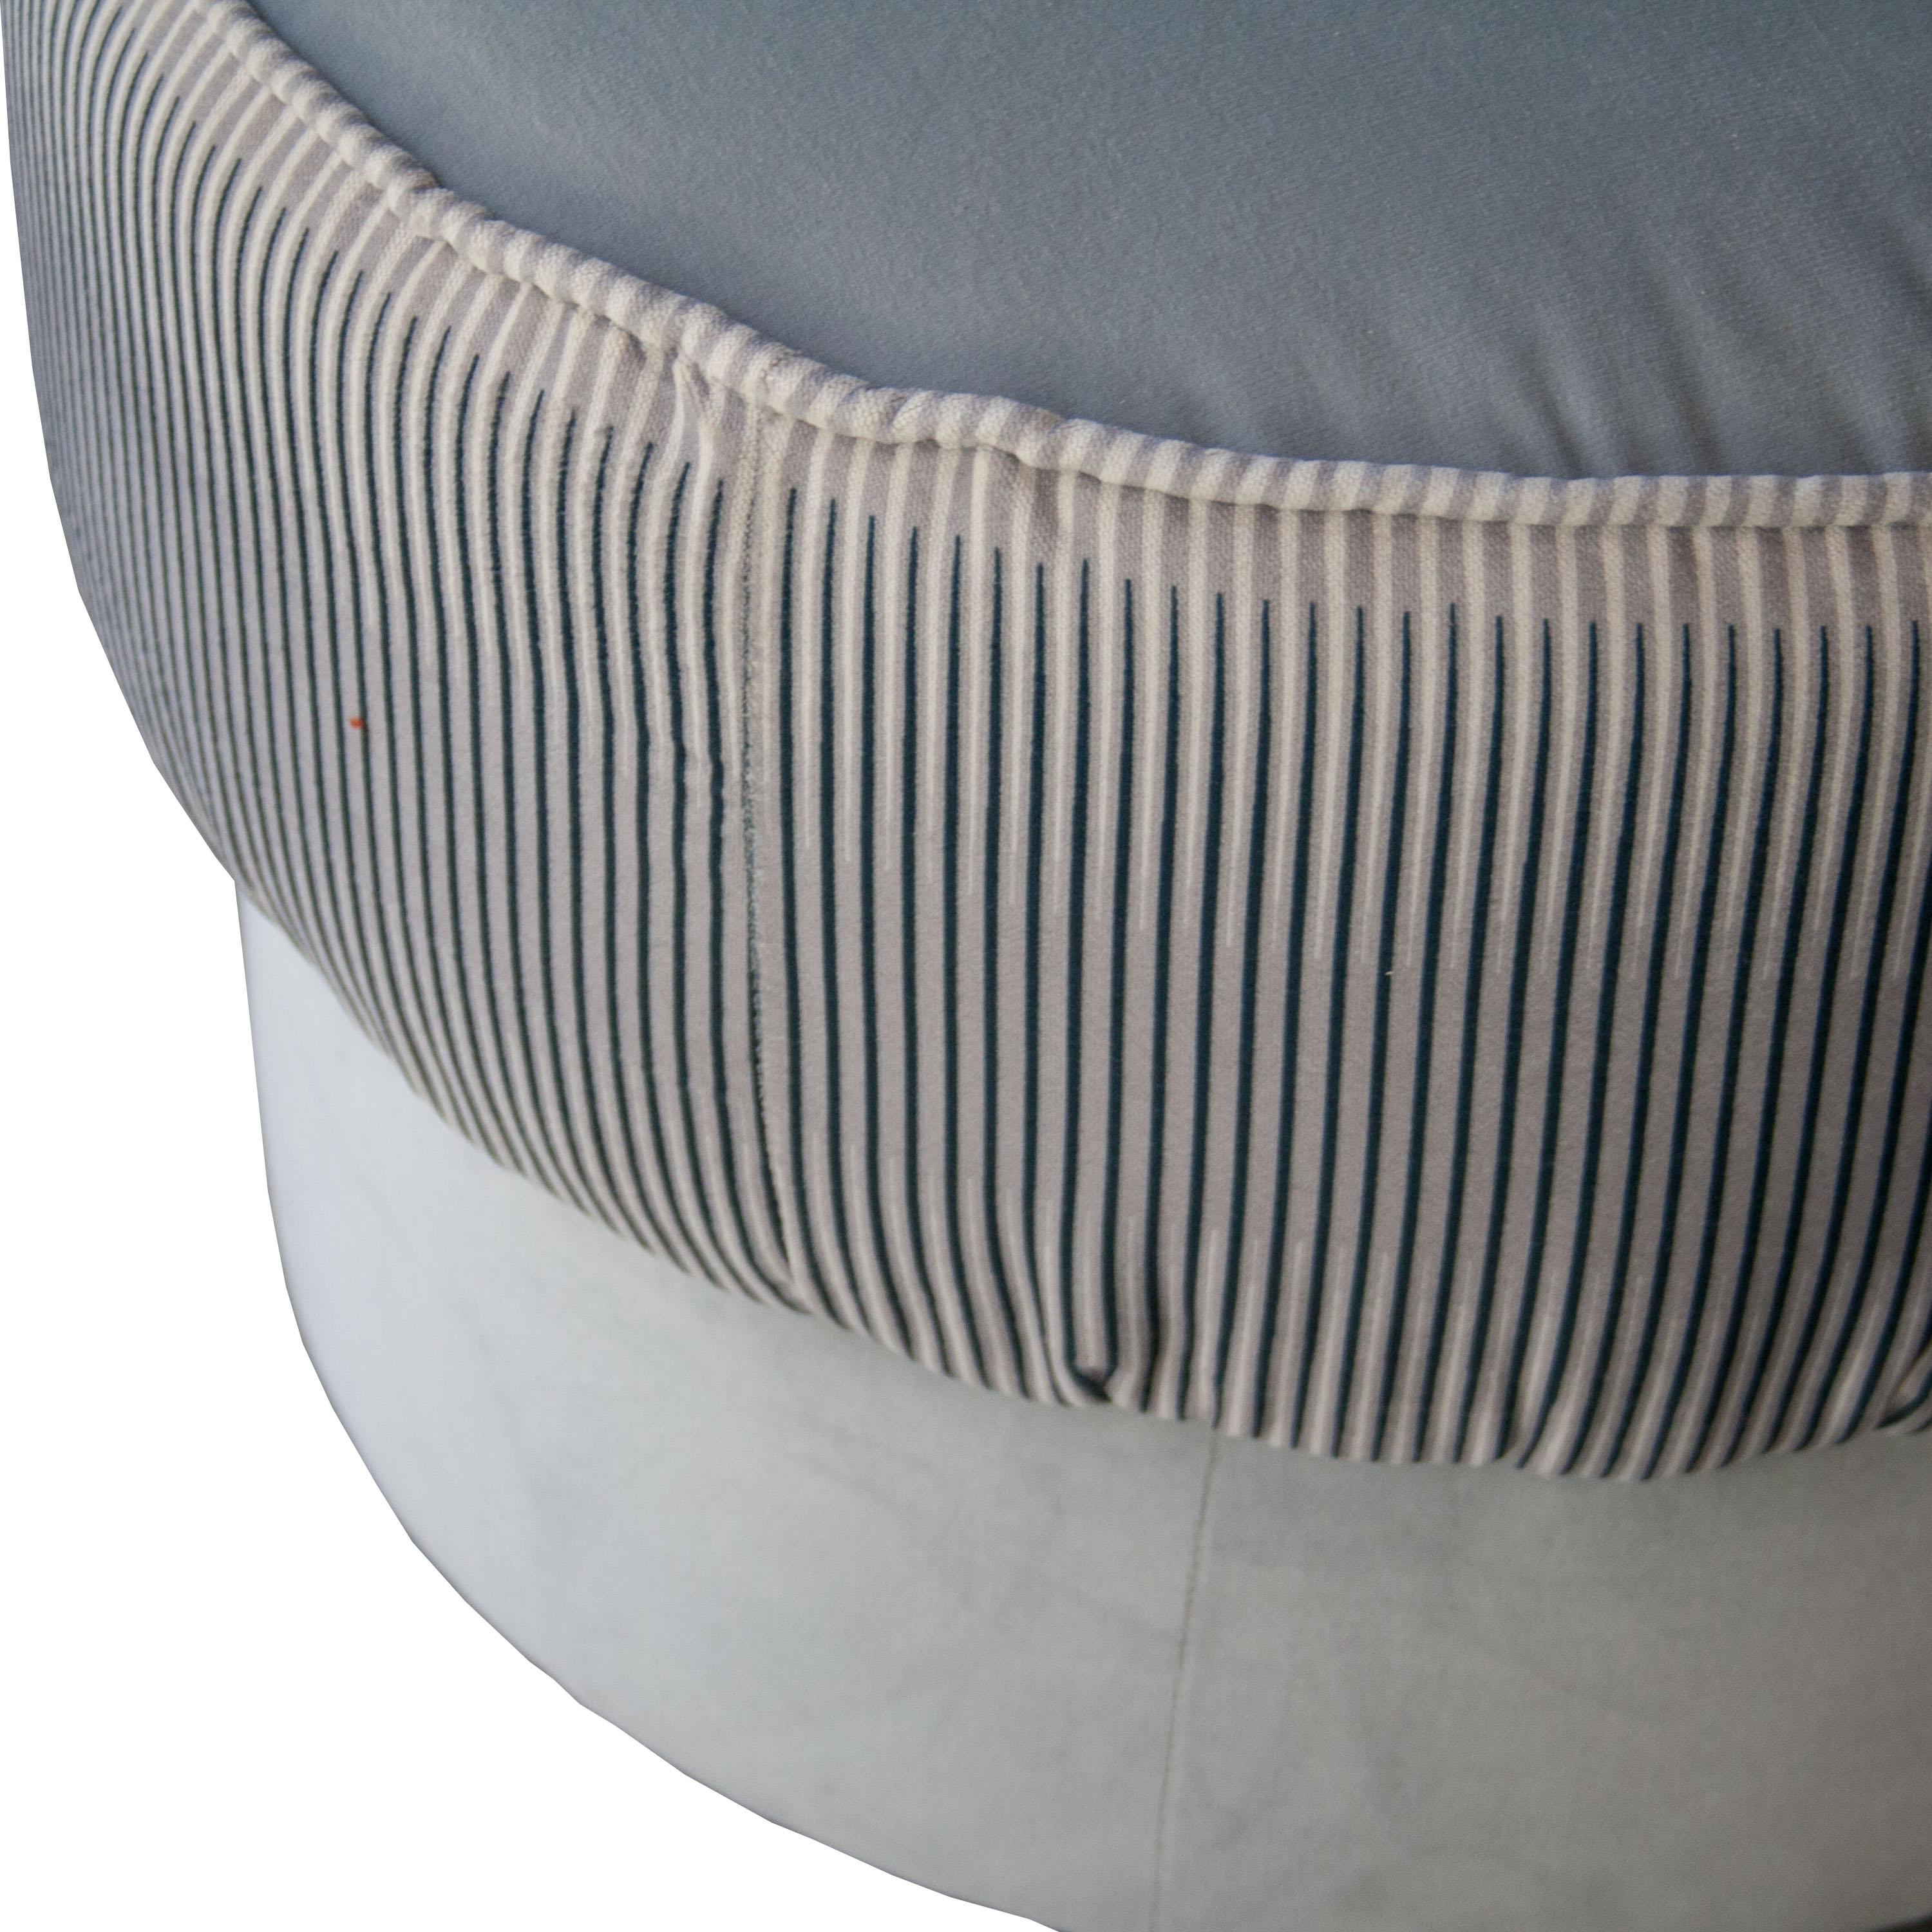 Mid-20th Century Mid-Century Modern Rounded Striped White Blue Italian Pouf, 1950